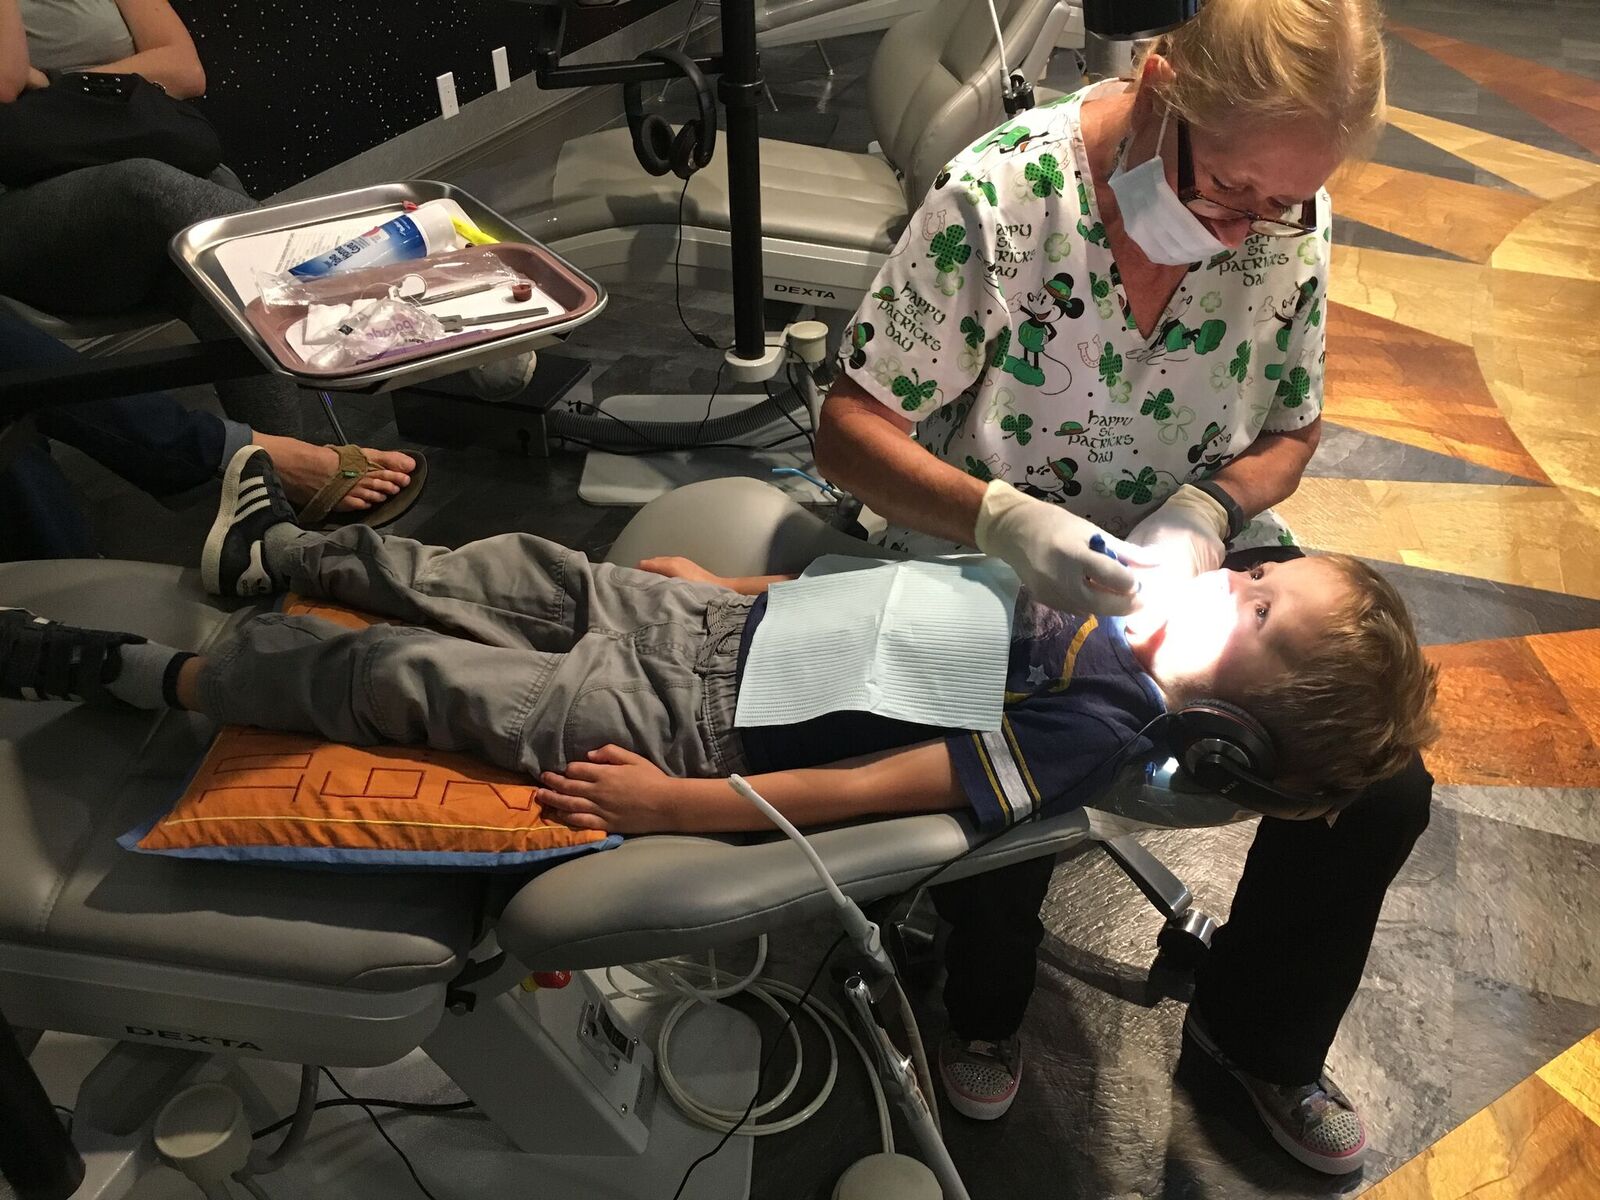 A child in a dental chair and being checked by a dentist